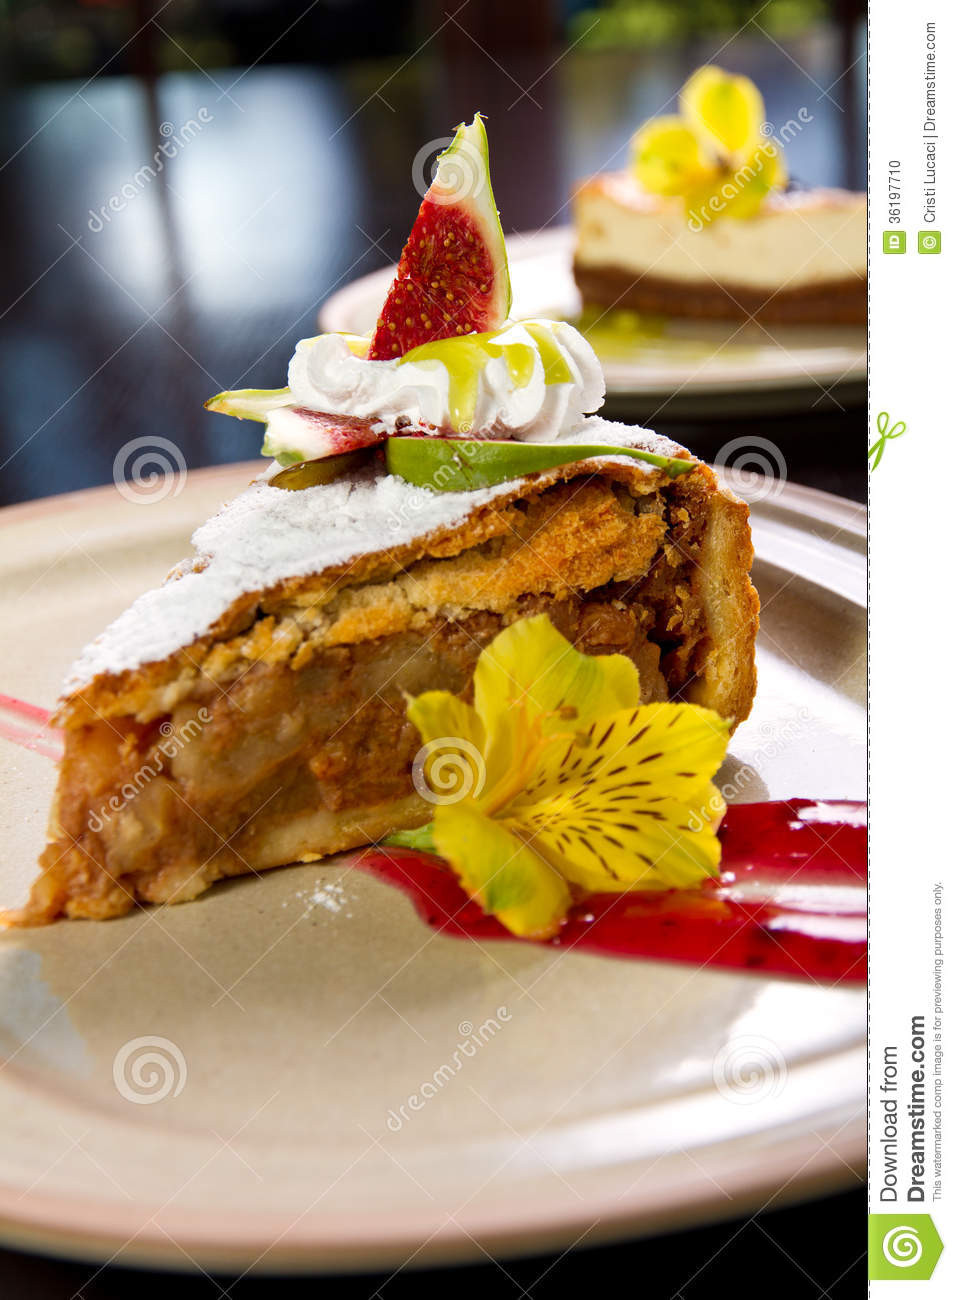 Gourmet Apple Pie Lovely Gourmet Apple Pie Stock Photo Image Of Meal Party